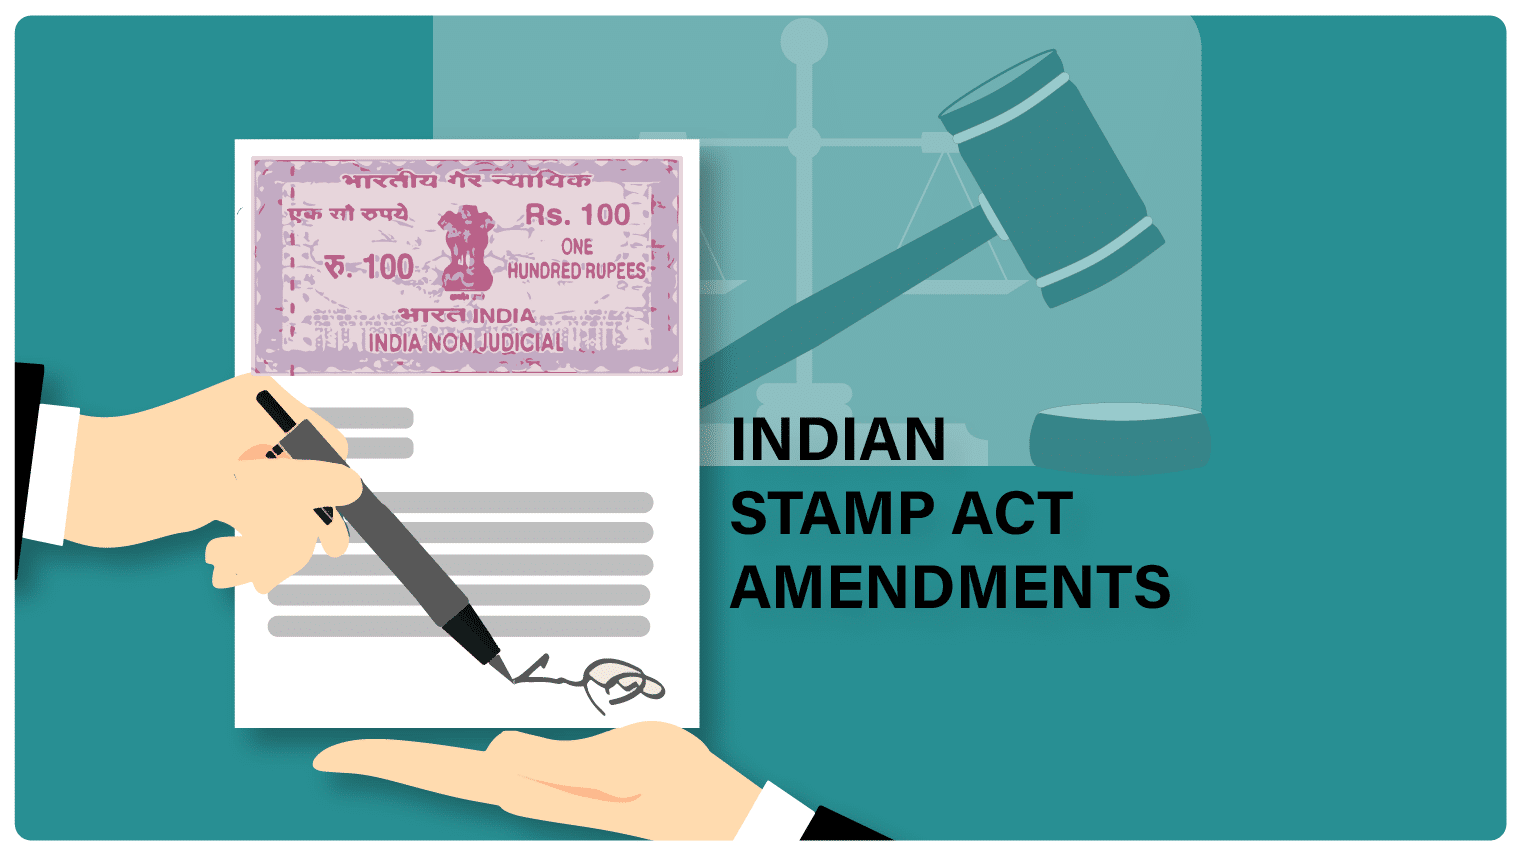 Amendments to the Indian Stamp Act 1899